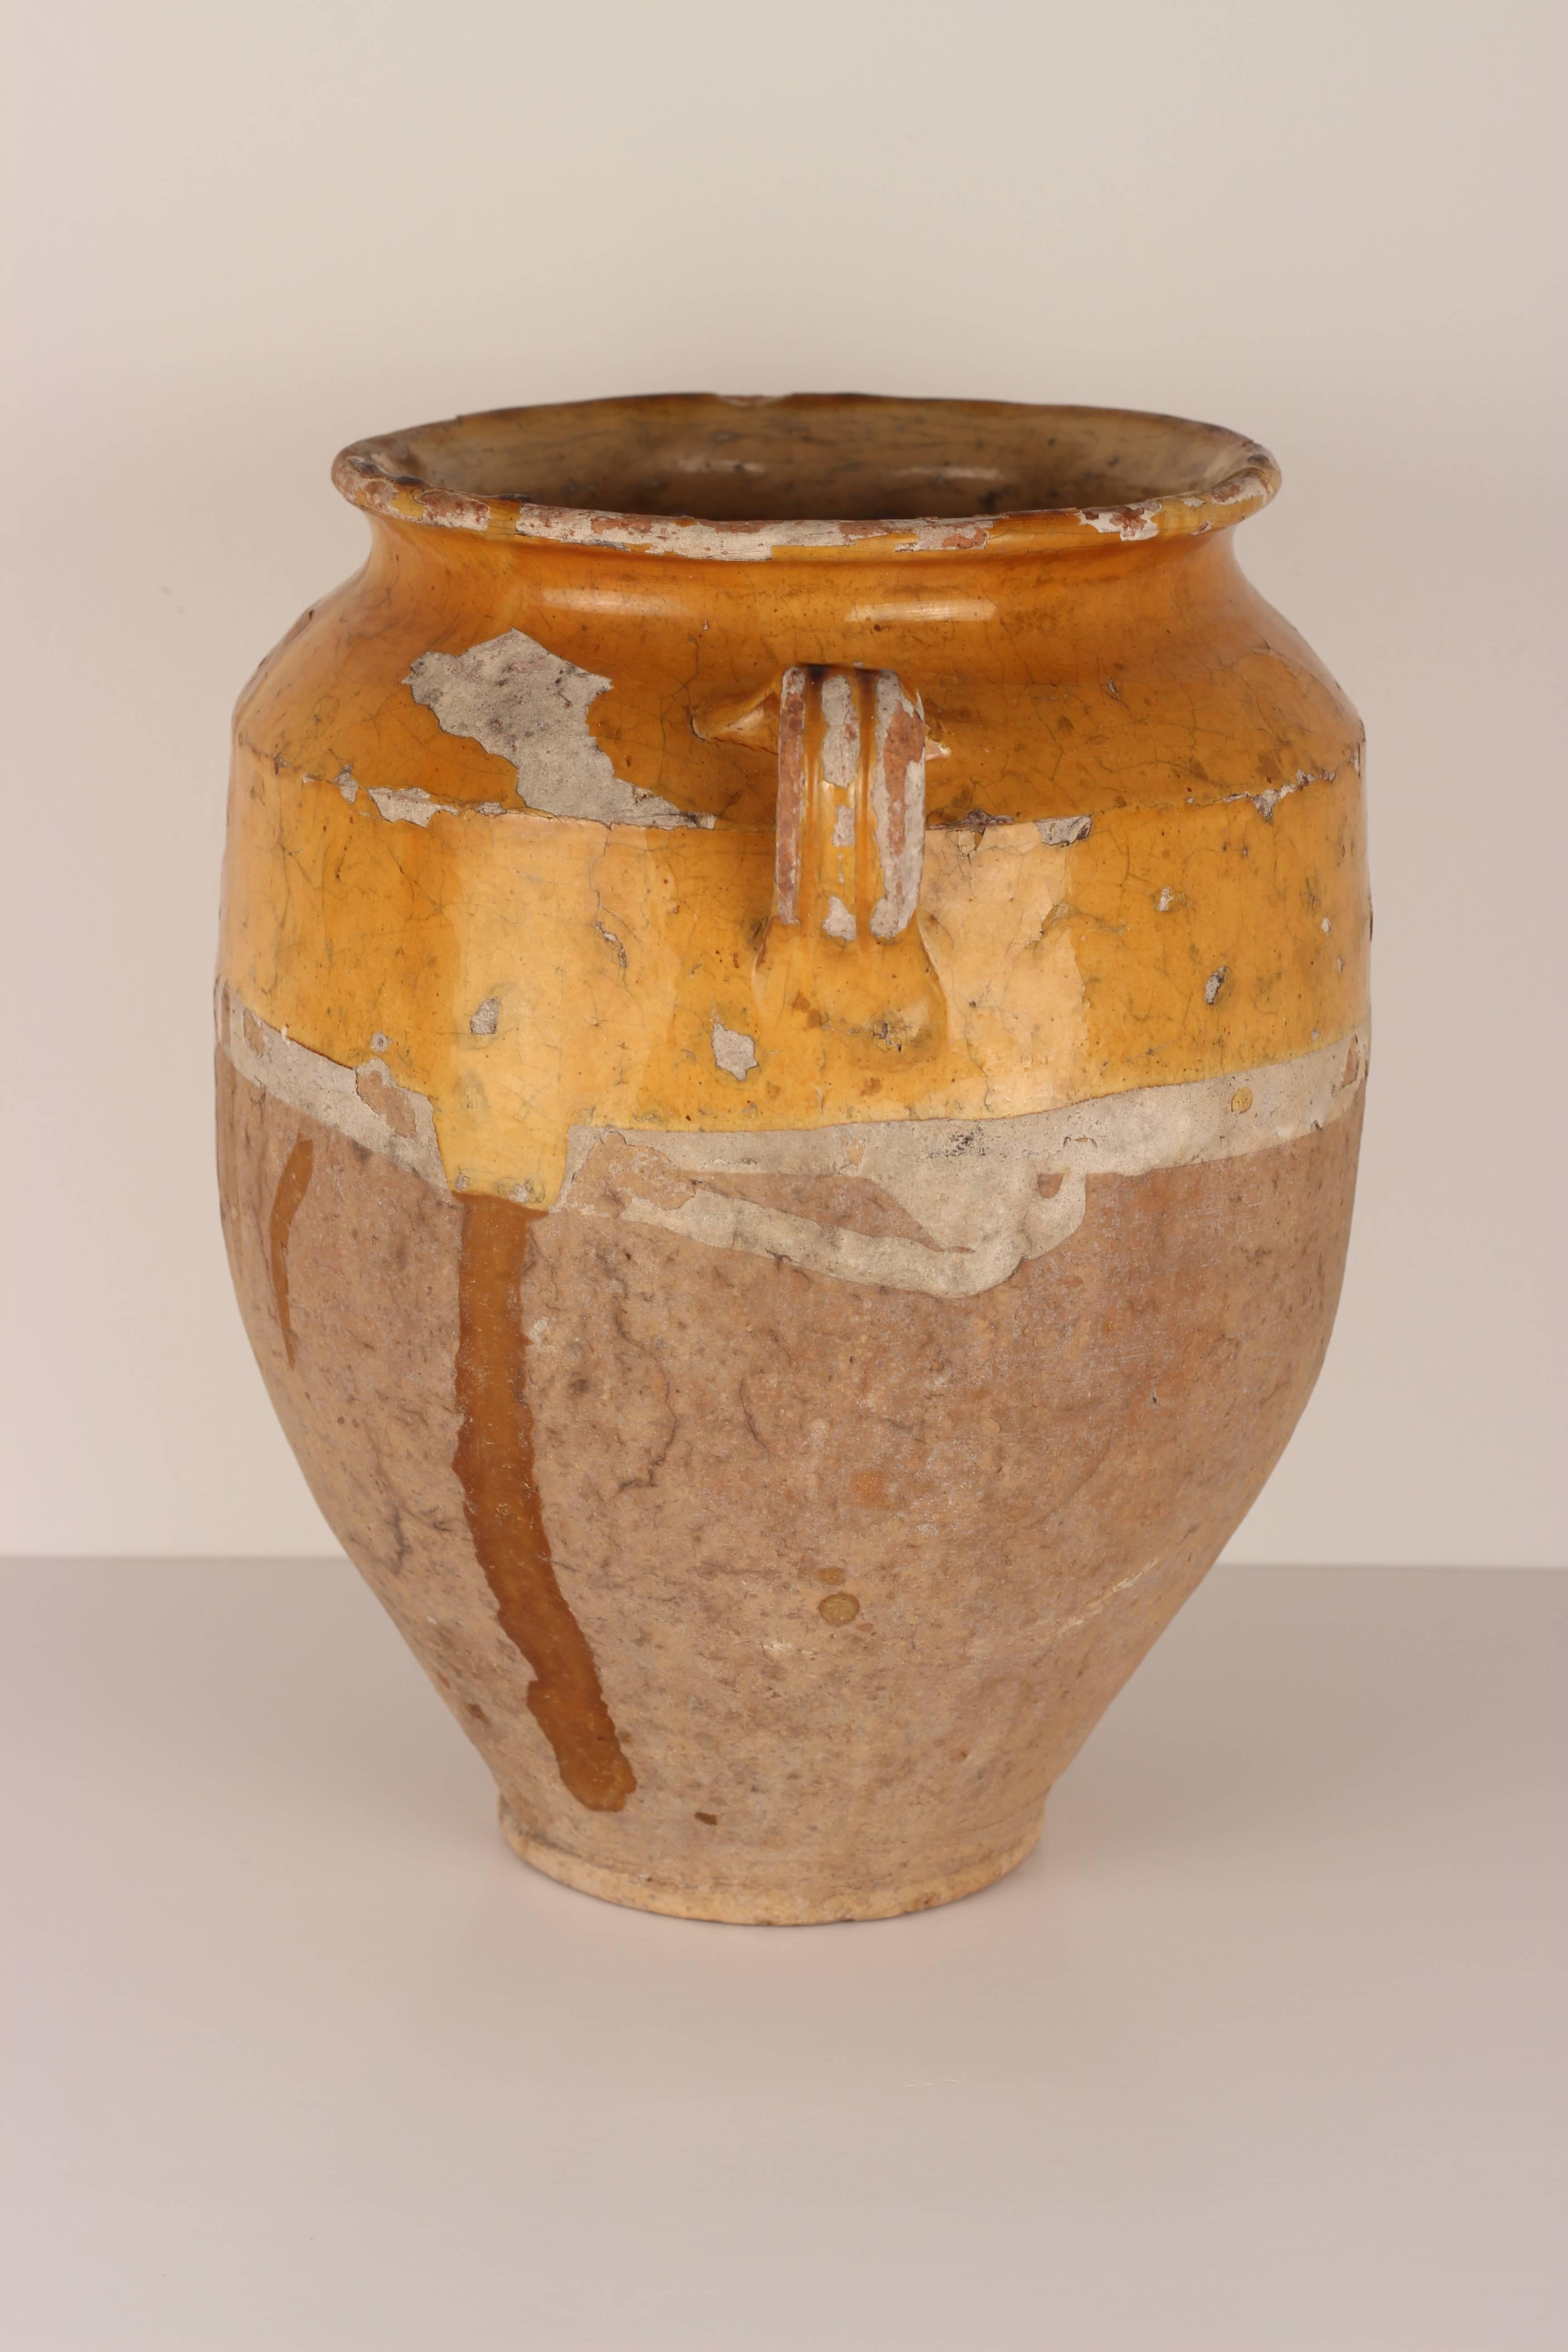 French Provincial Decorative Confit Pot from the South of France, 19th Century